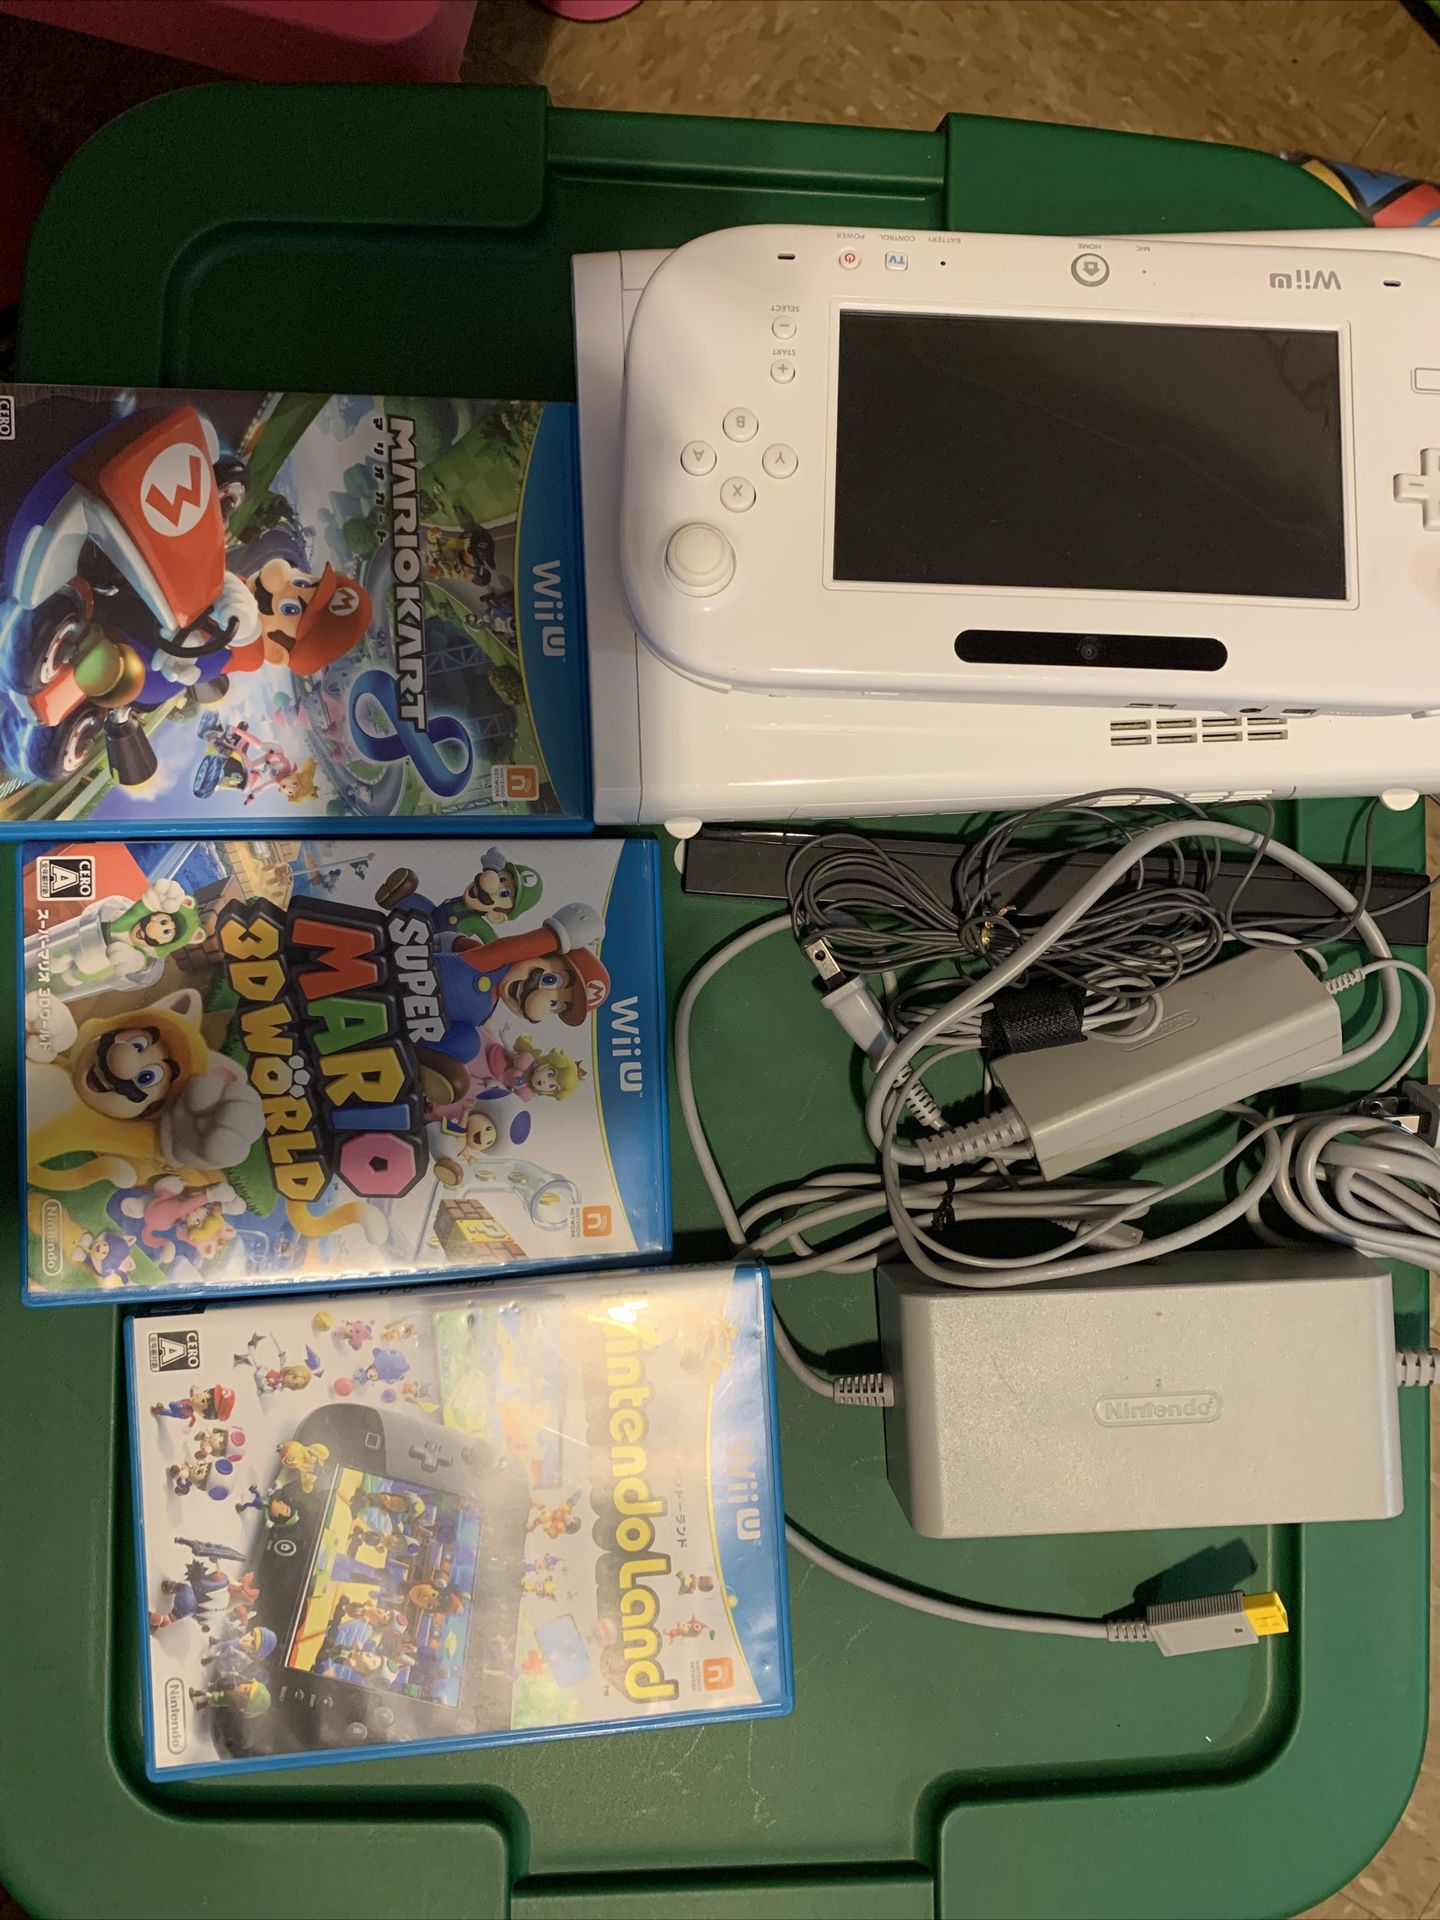 Nintendo Wii U White 32 GB JAPANESE VERSION CONSOLE AND GAMES 